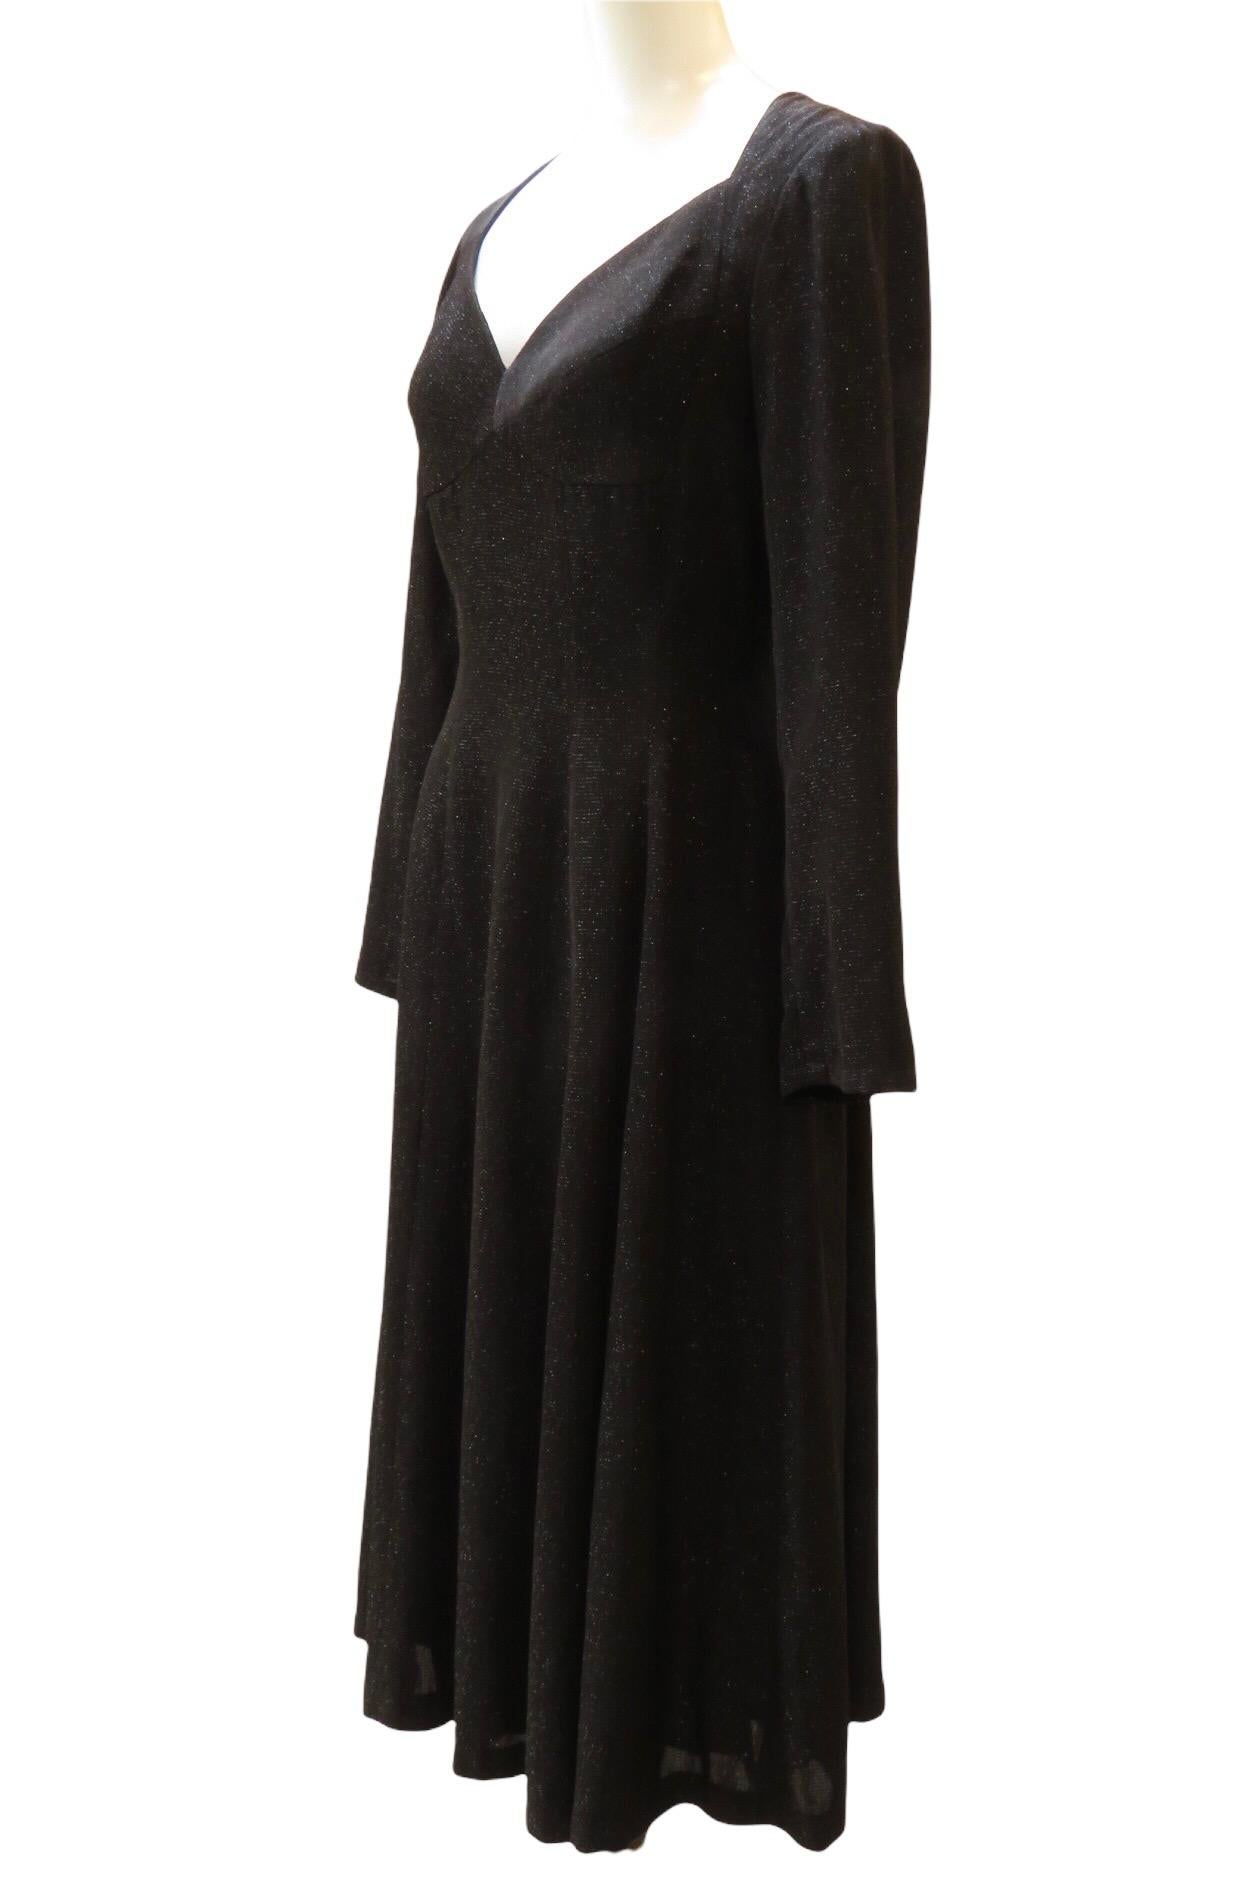 A shimmering black knee length, Lon sleeved dress by Matsuda Nicole features a flattering sweetheart neckline and back zipper.